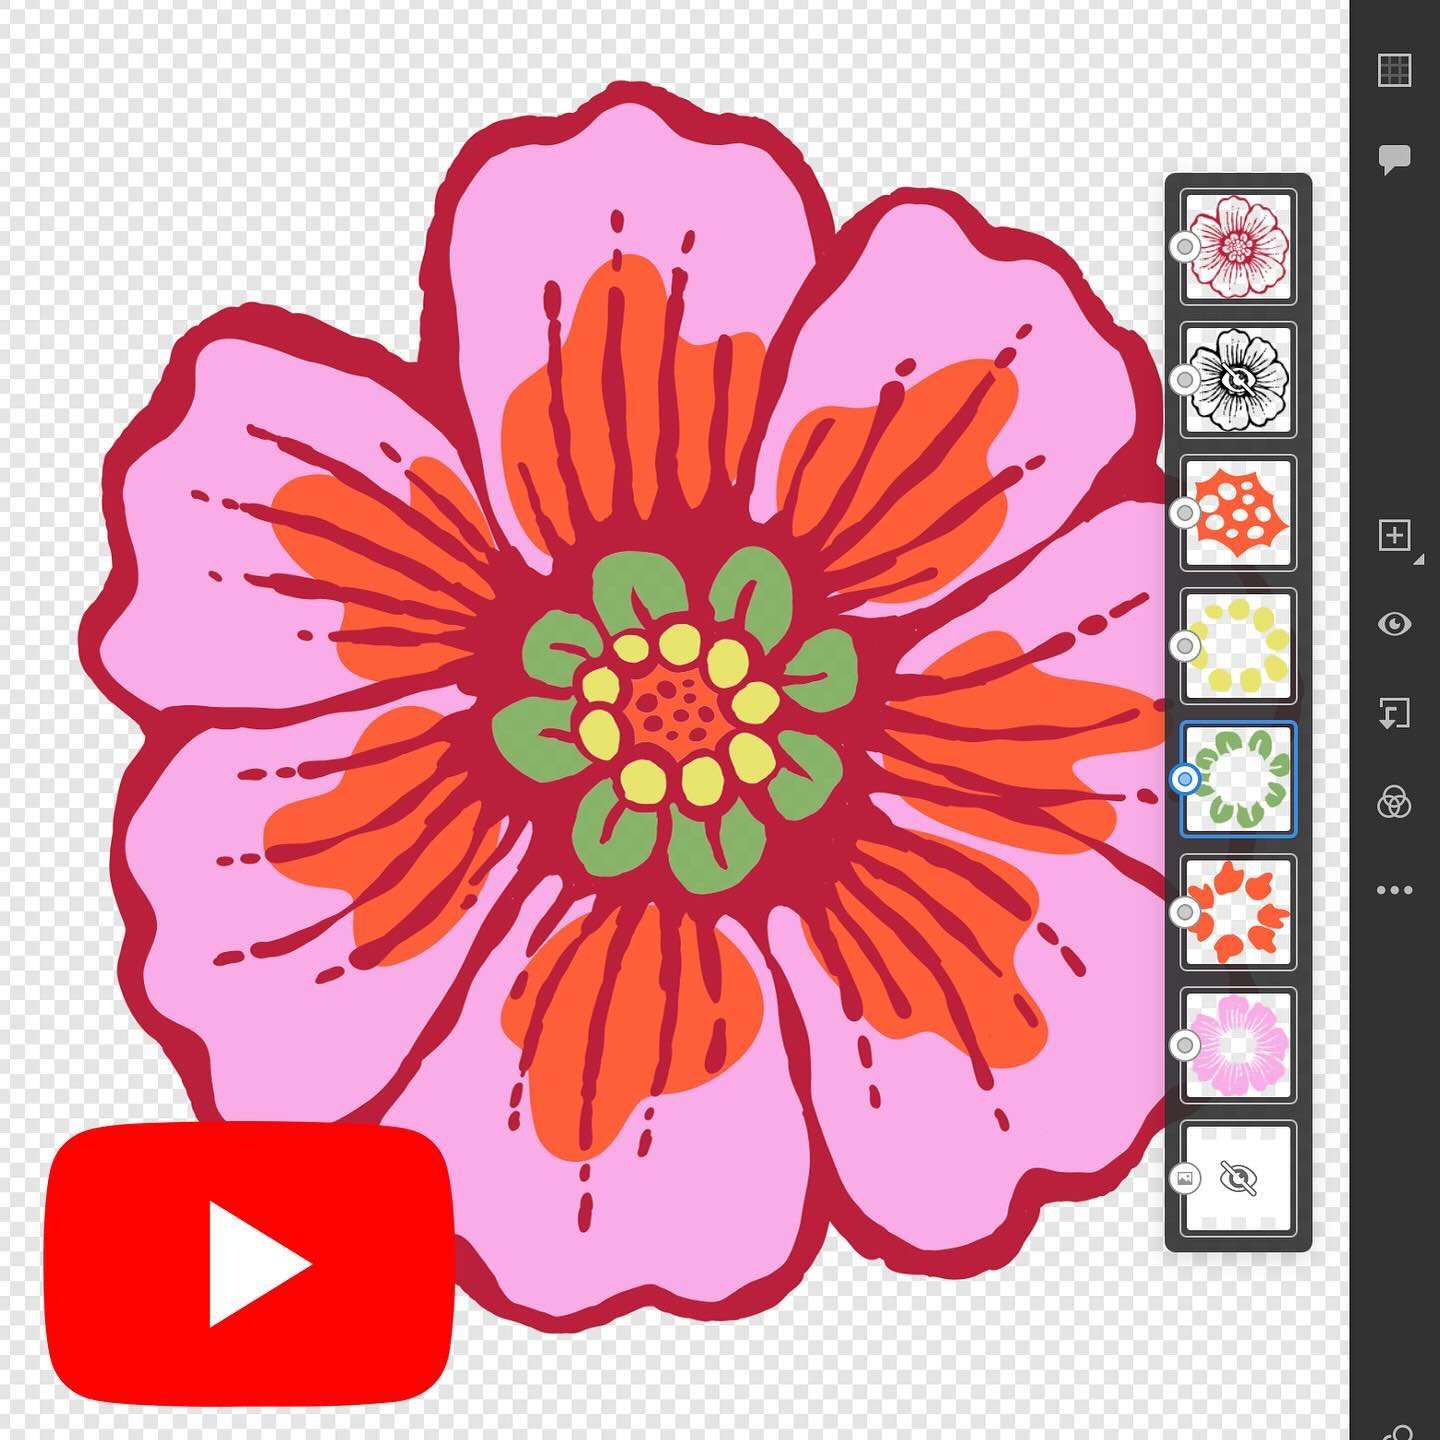 Adobe Fresco and Illustrator are a powerful combination! Learn my favorite tips and tricks in my latest video on YouTube. See my 👆linkinbio to watch.🌺 #patterndesign #patterndesigner #patterns #surfacepattern #surfacedesign #adobeillustrator #adobe